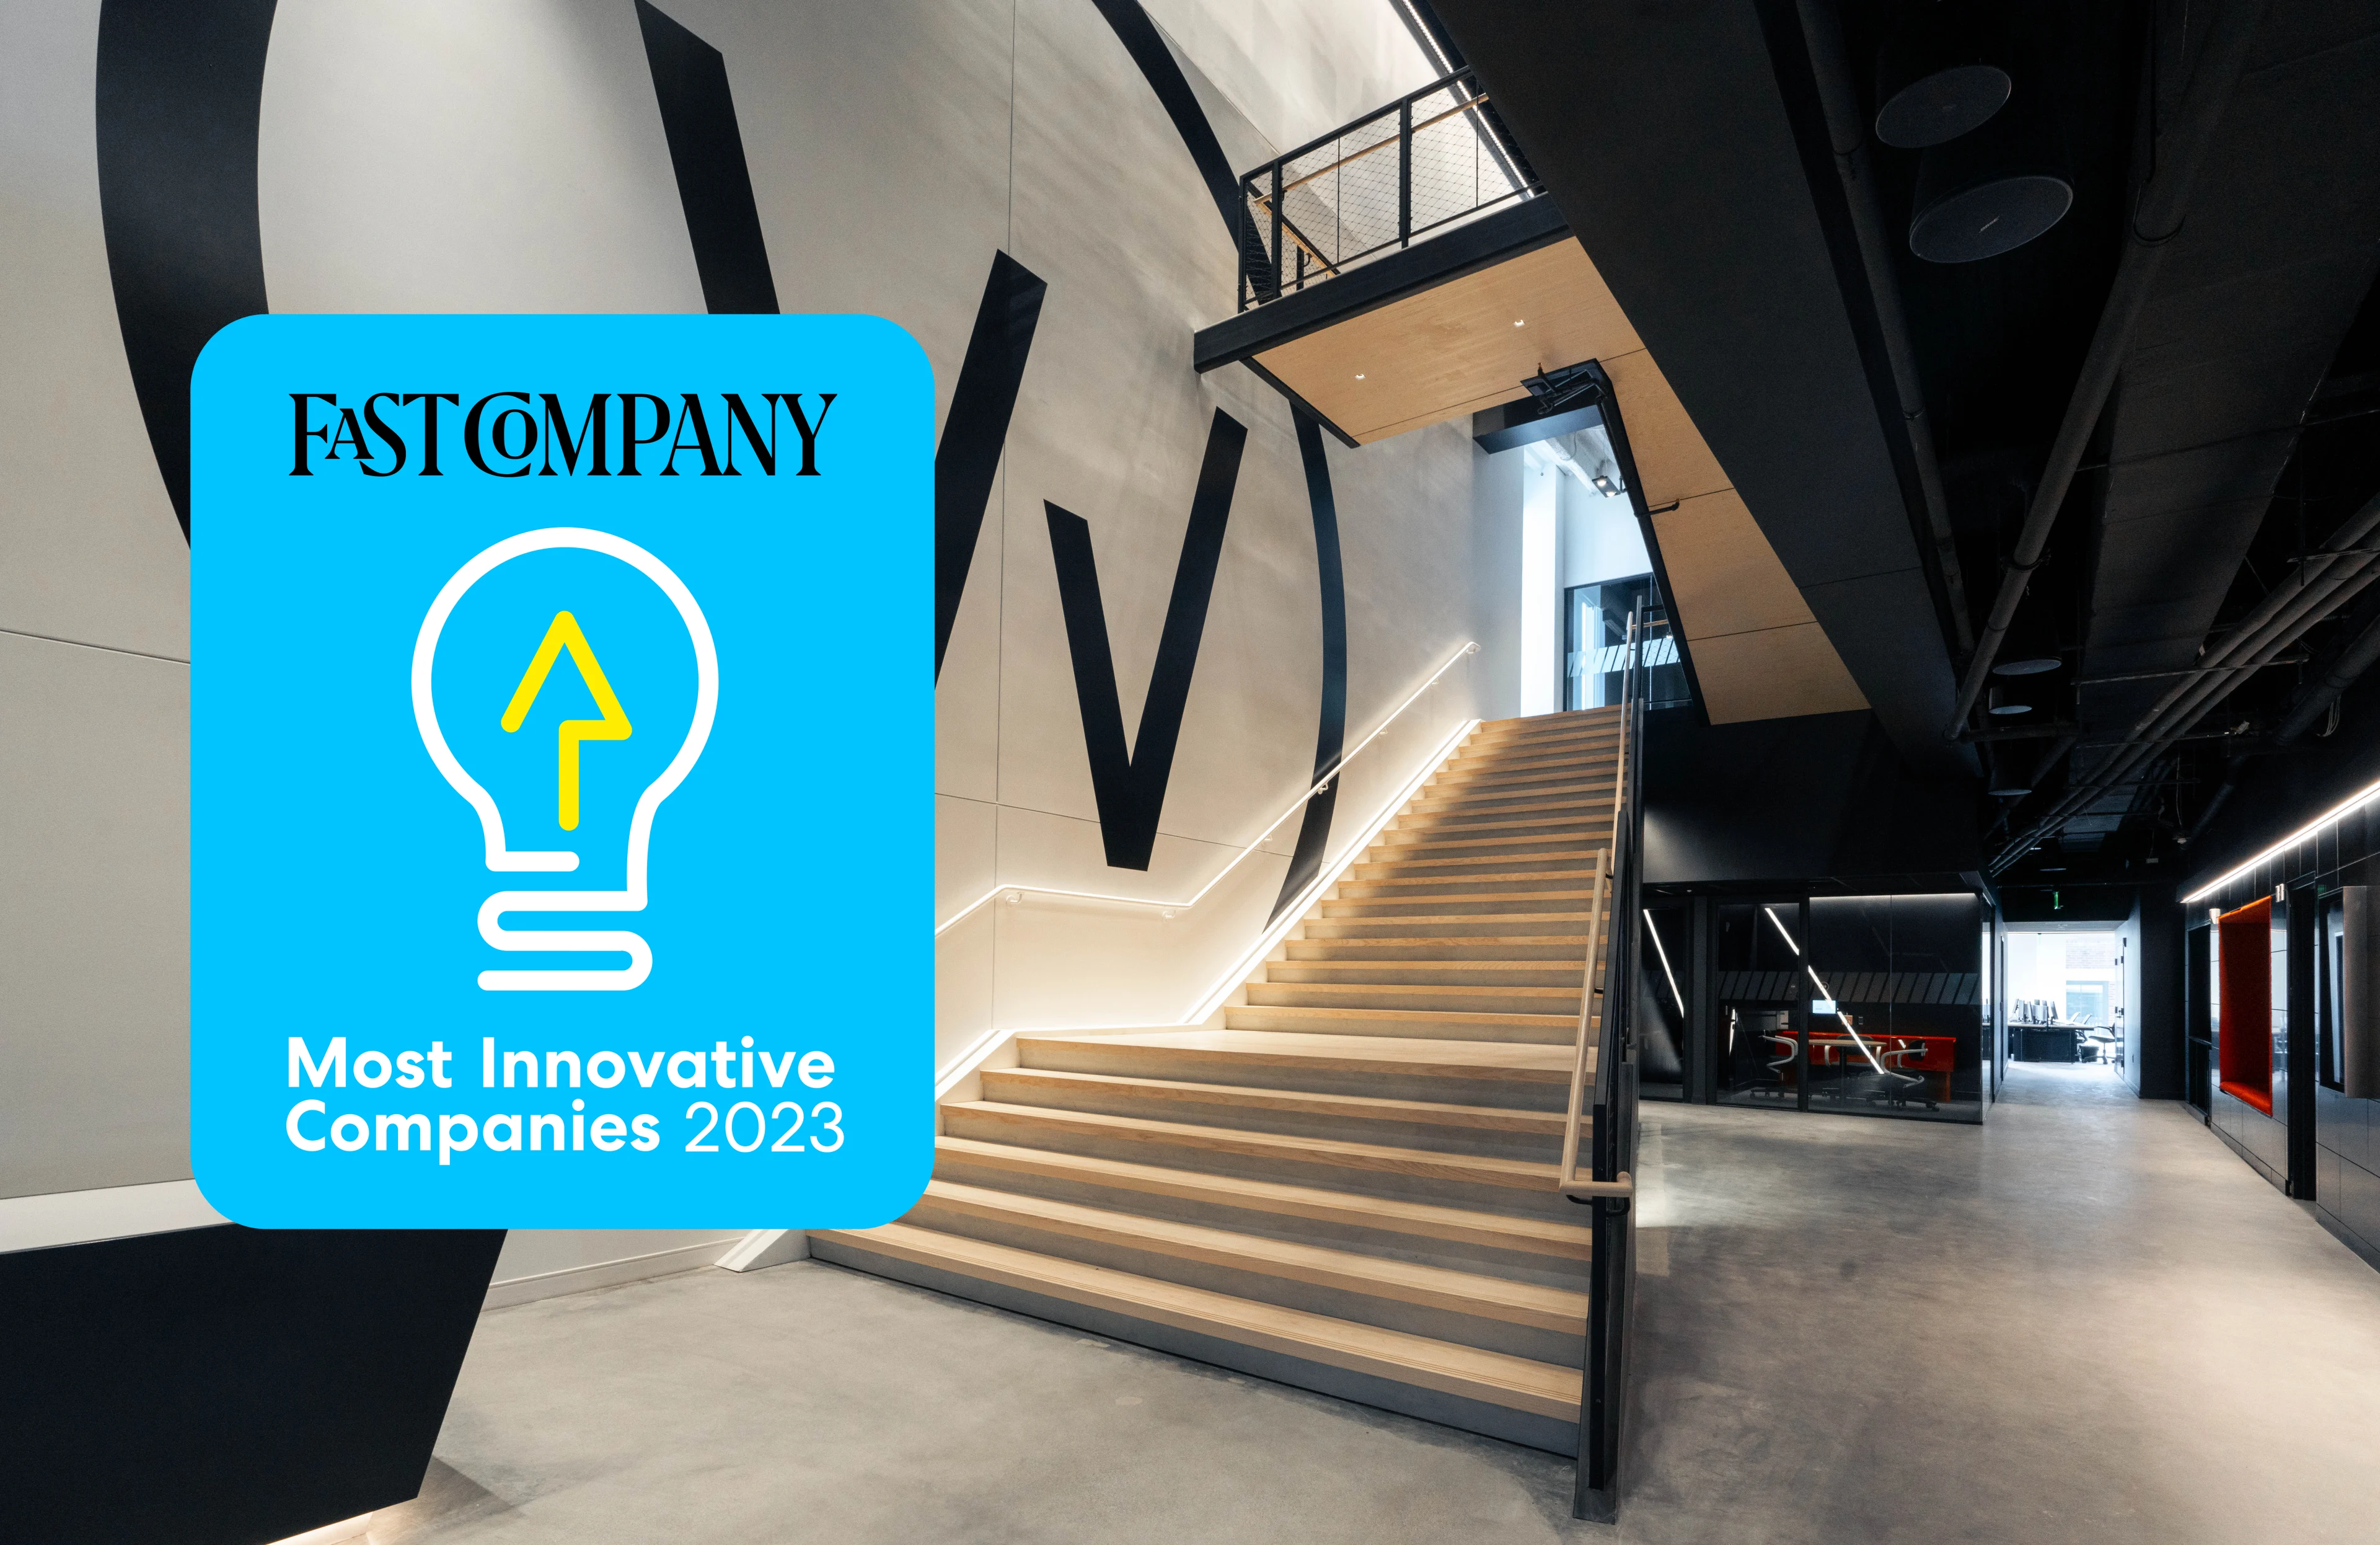 Interior of the contemporary WHOOP office showcasing the 2023 Fast Company Award for Most Innovative Companies.